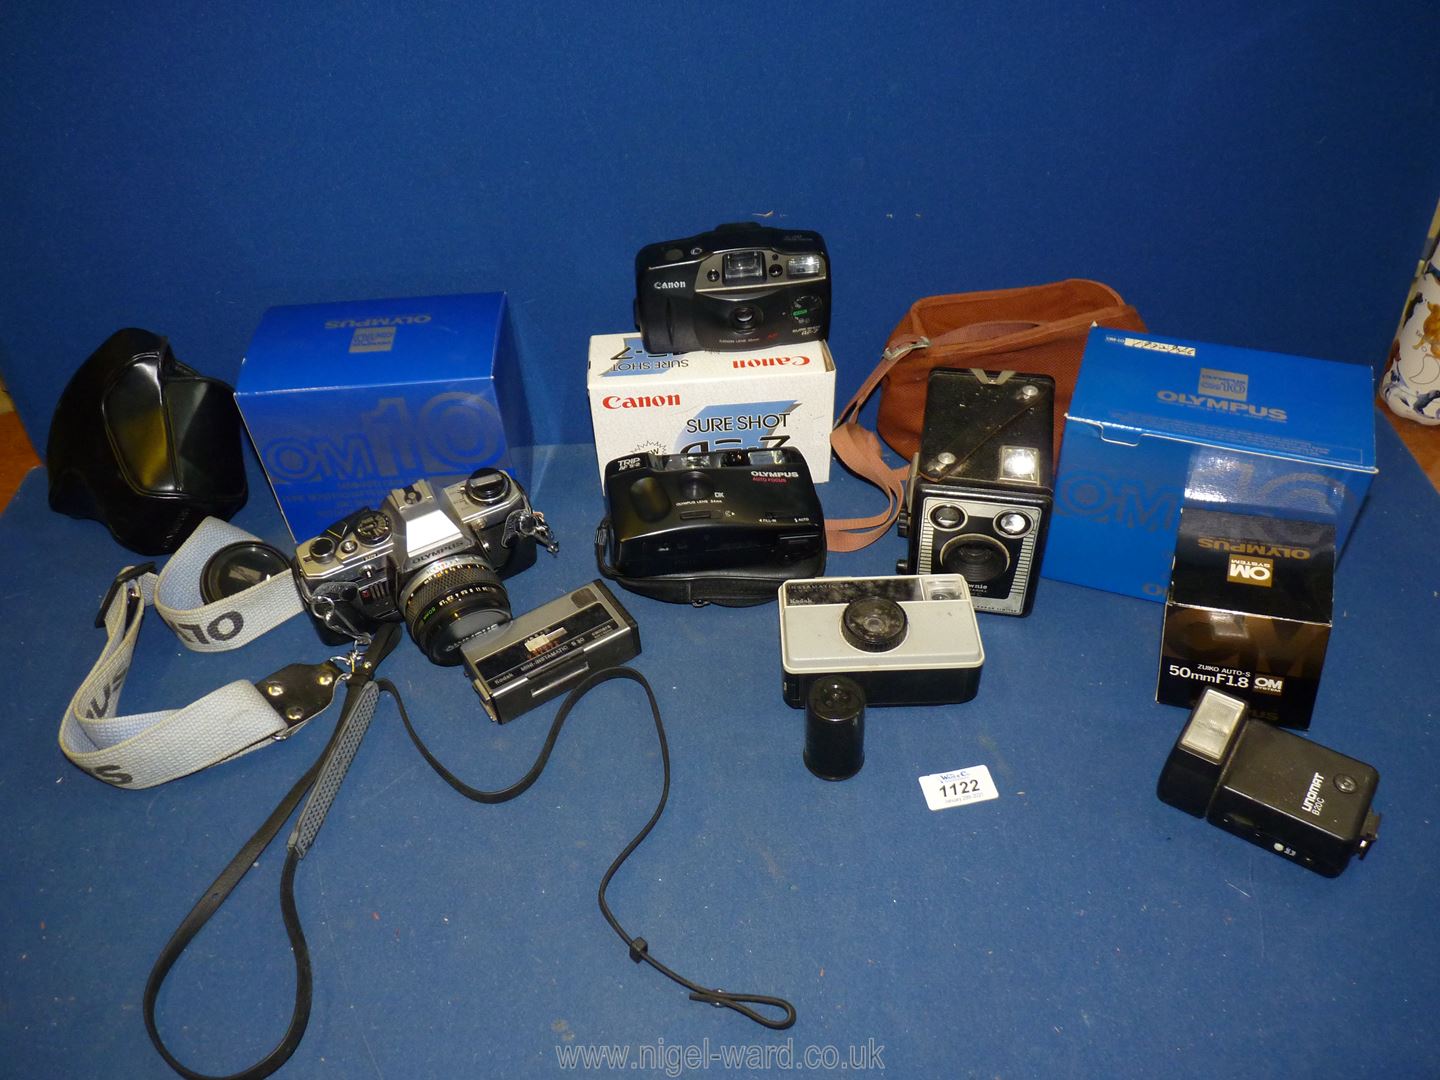 A quantity of cameras including Brownie Six - 20 model C in a case, two boxed Olympus OM ,